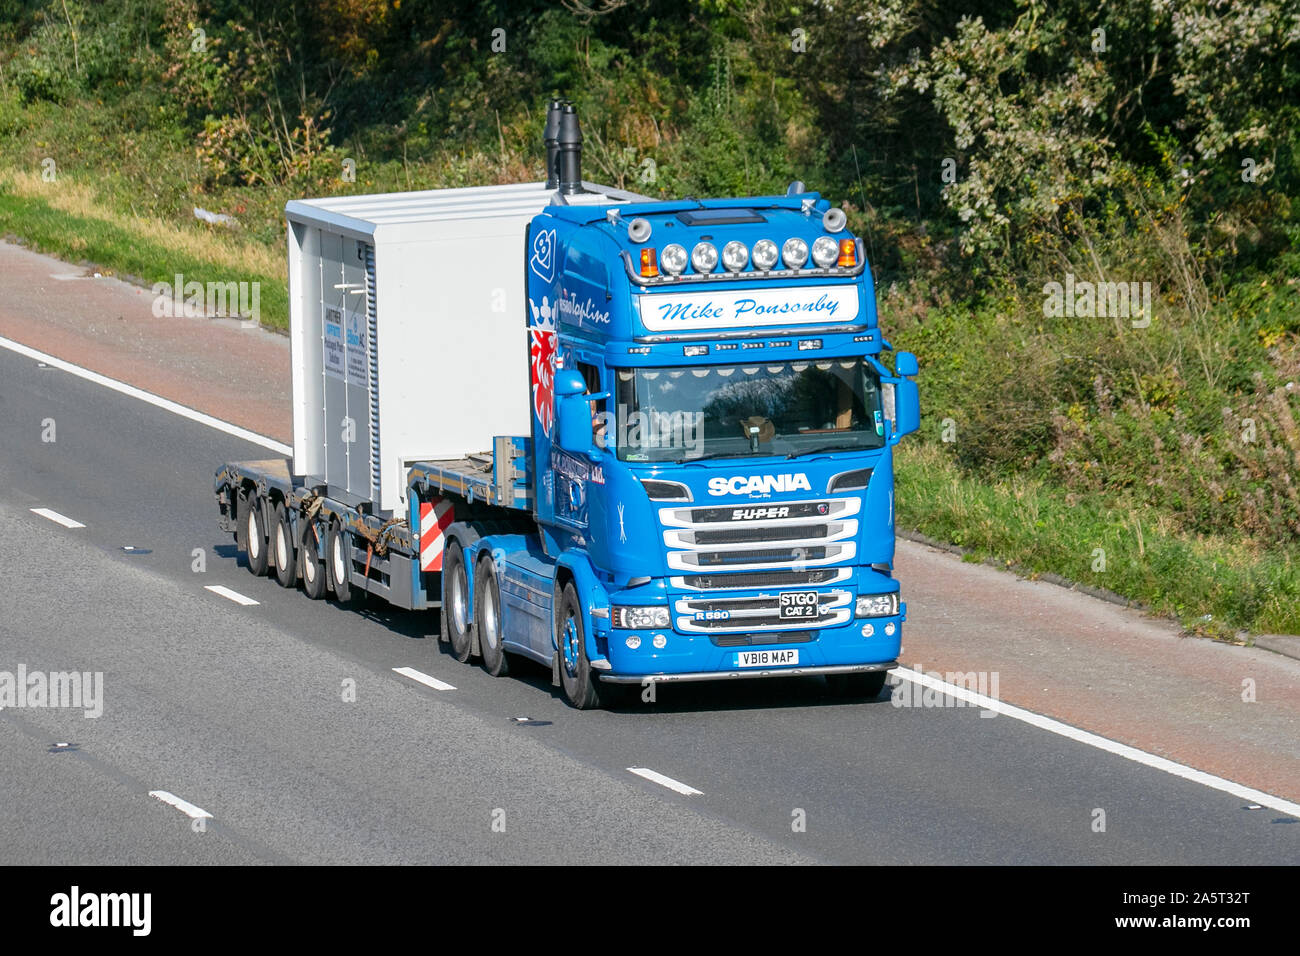 Mike Ponsonby Ellison AC Packaged Plant Solutions; Haulage delivery trucks, lorry, transportation, truck, cargo, Super Scania R500 vehicle, delivery, commercial transport, industry, supply chain freight, on the M6 at Lancaster, UK Stock Photo